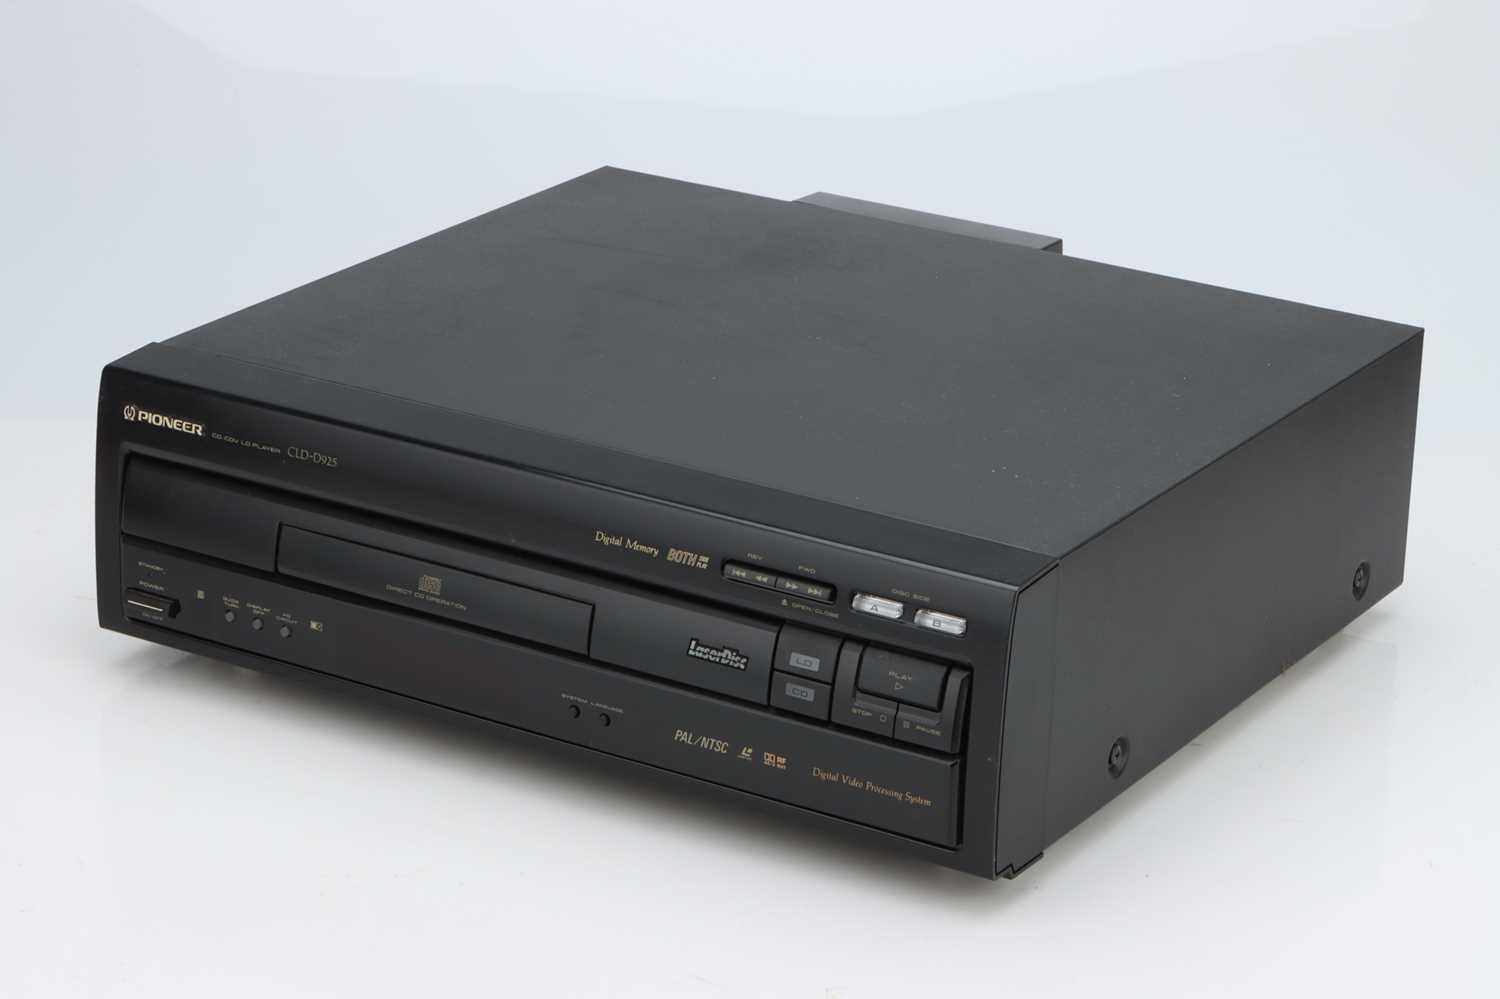 A Pioneer CLD-D925 LaserDisc Player,